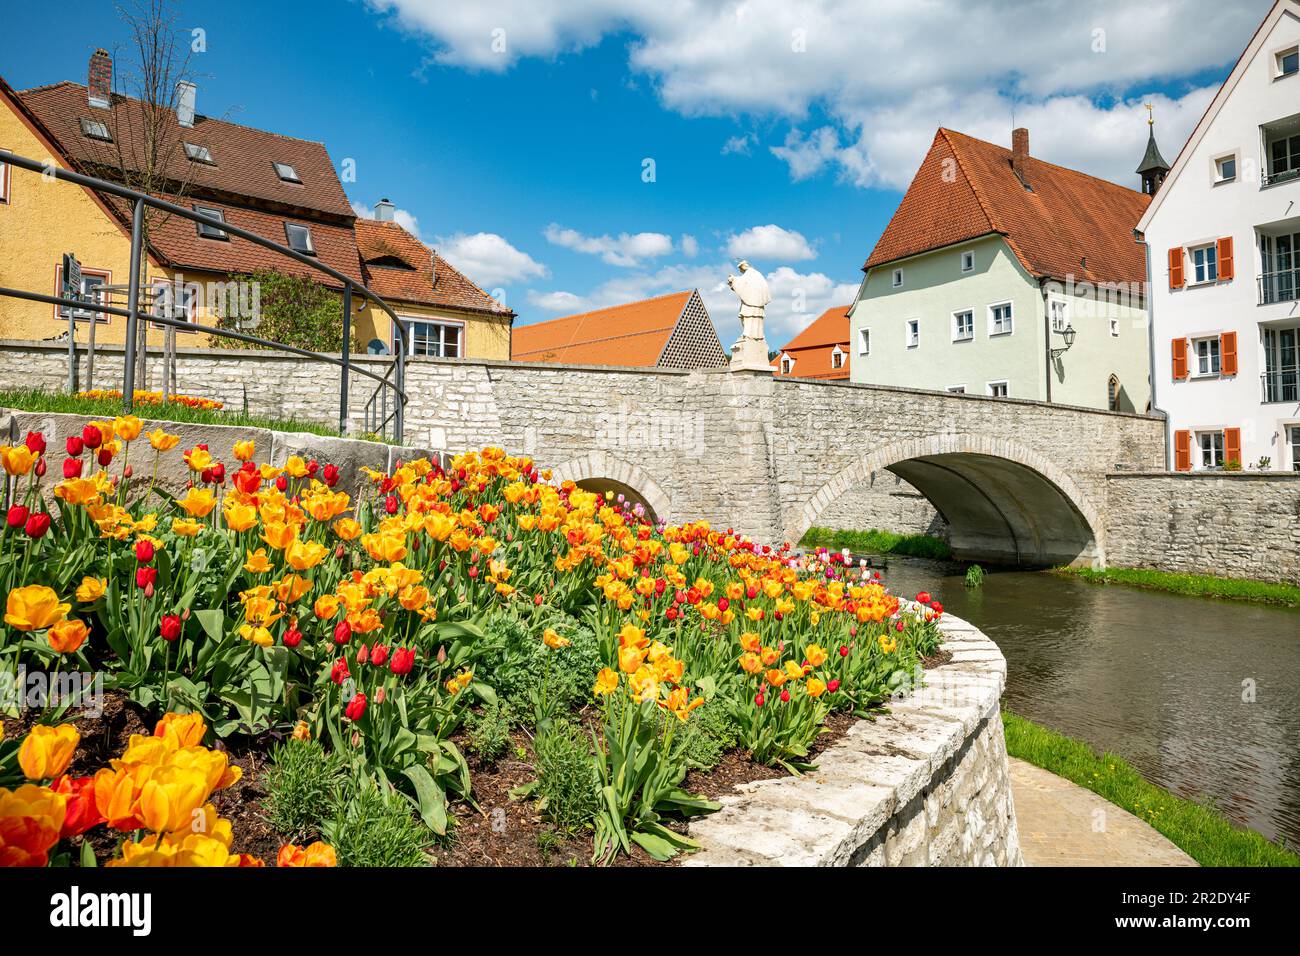 beautiful colored houses in the german town of berching Stock Photo